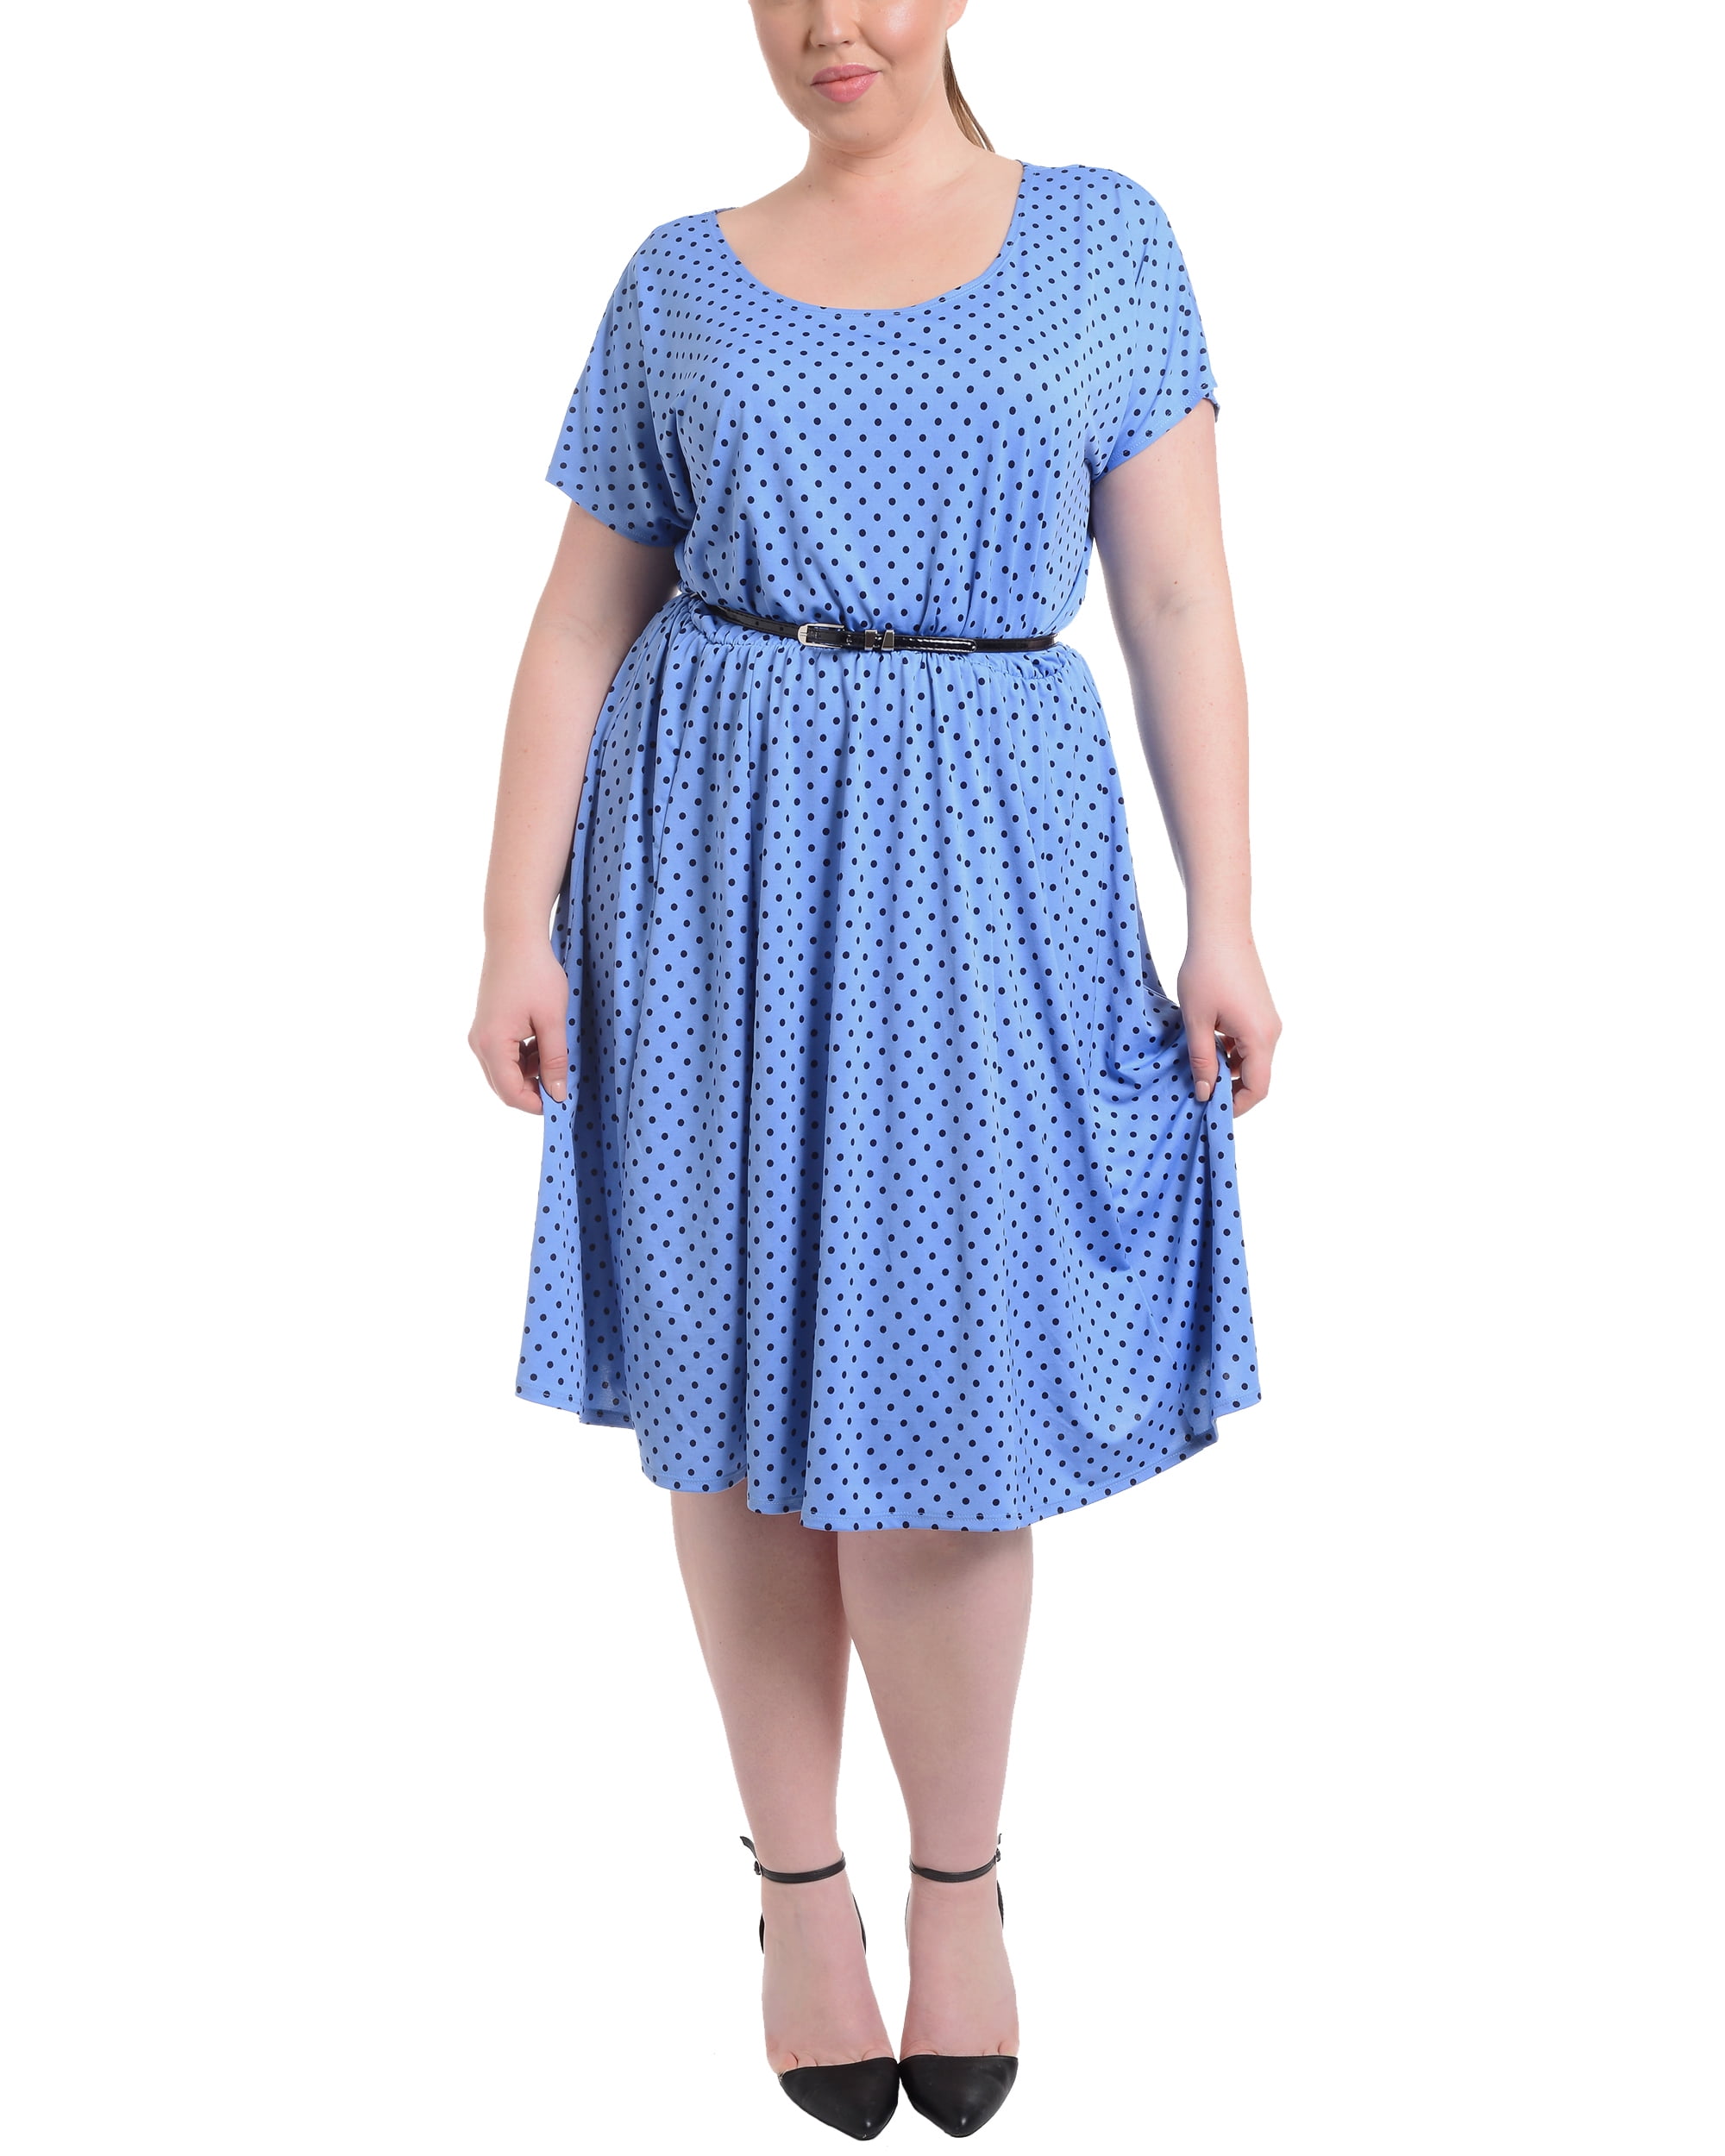 Plus Size Polka Dot Belted Fit and Flare Dress - Walmart.com